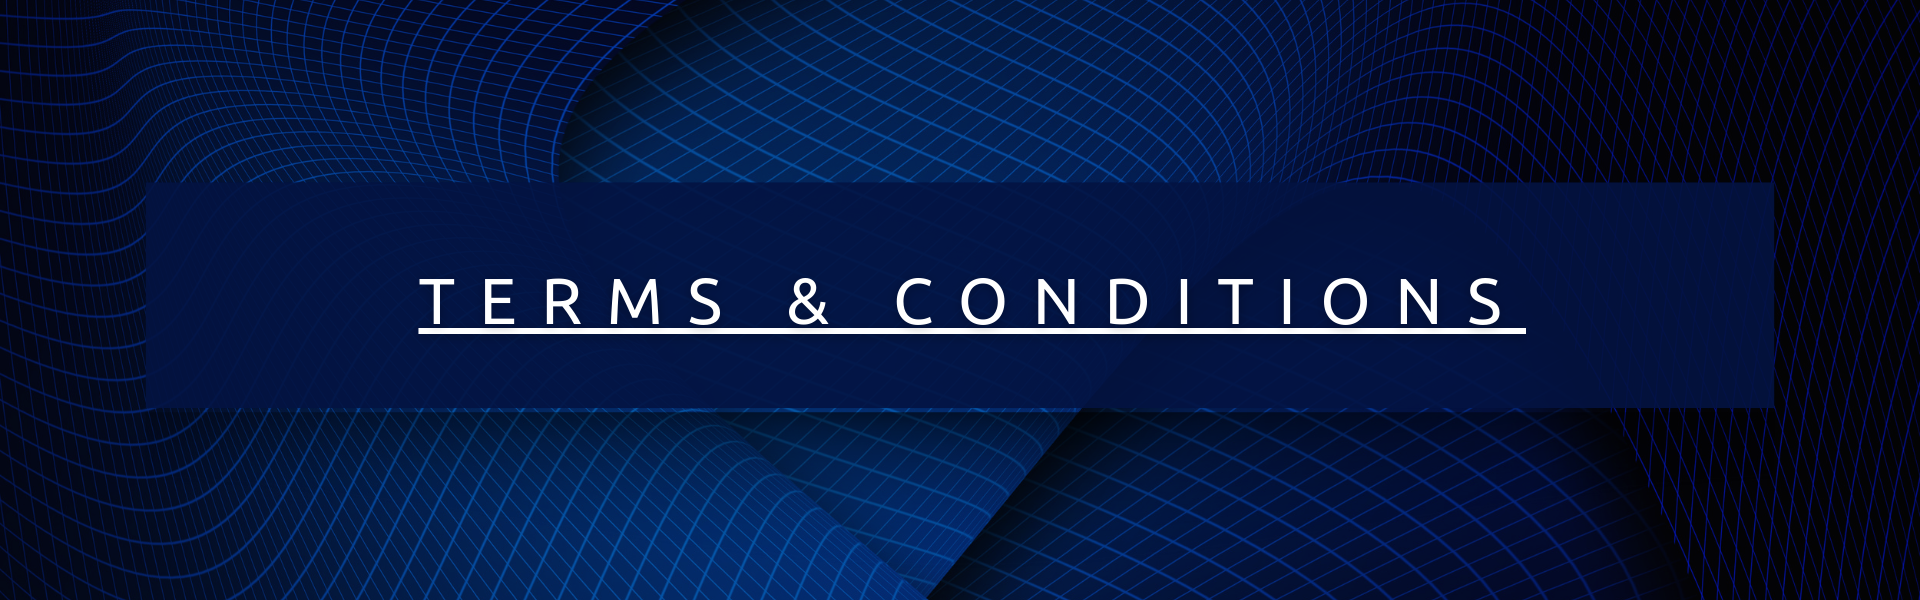 terms and conditions hd